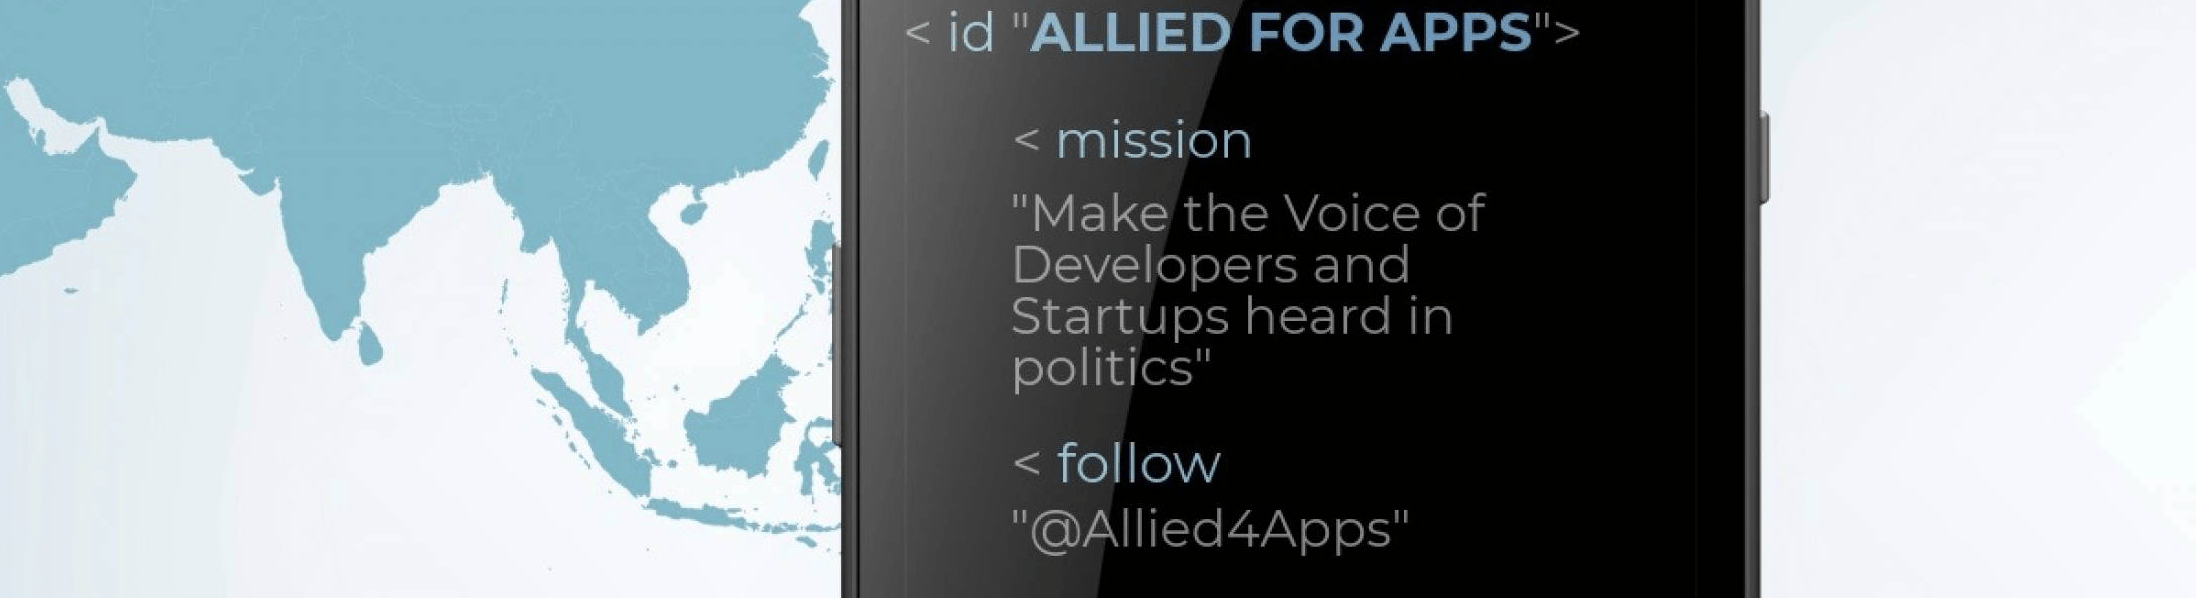 Allied4Apps